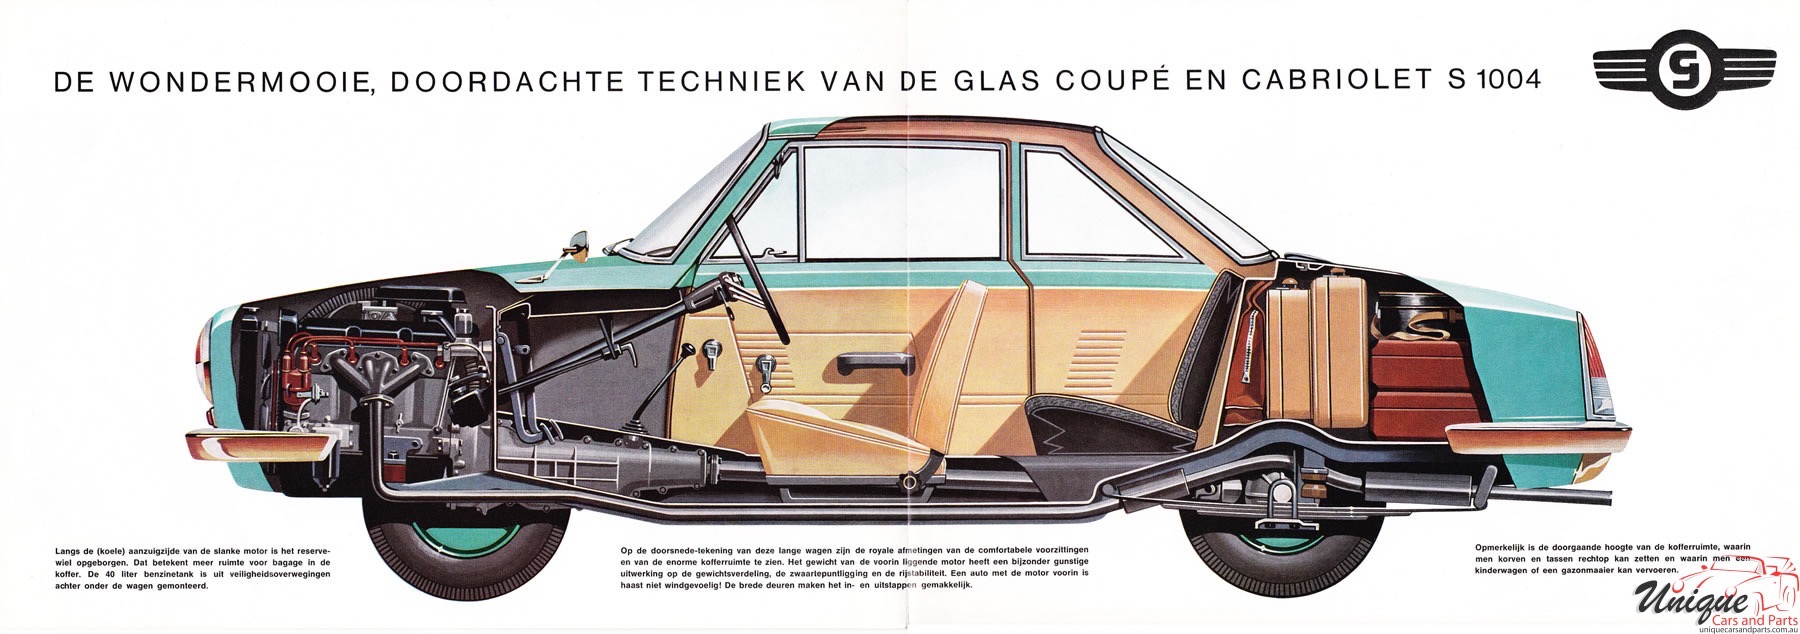 1963 Glas S1004 Sports Brochure Page 8